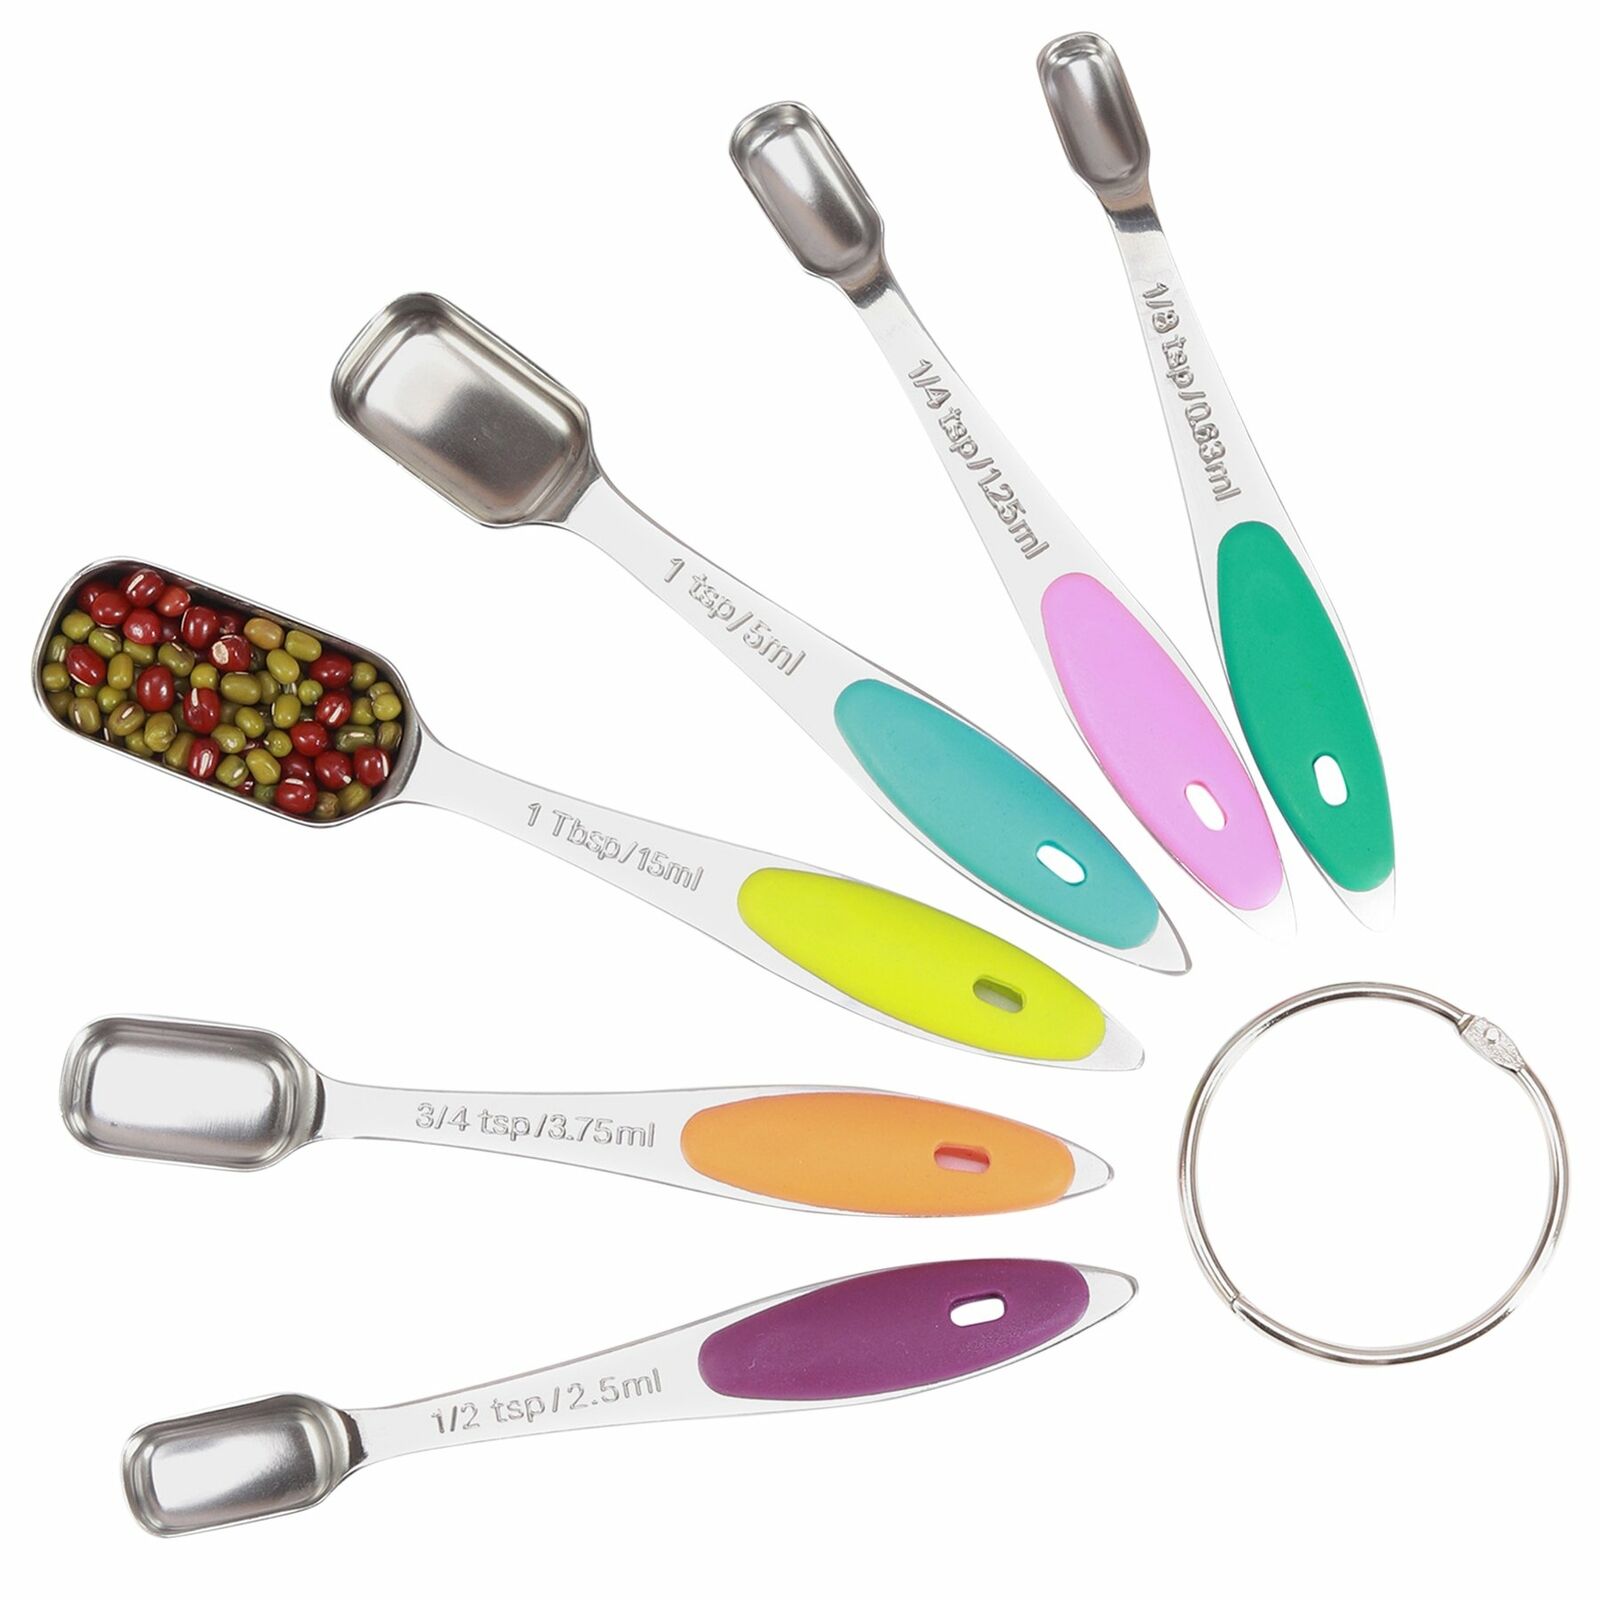 Stainless Steel Set of 6 Measuring Spoons for Dry or Liquid Fits in Spice Jar